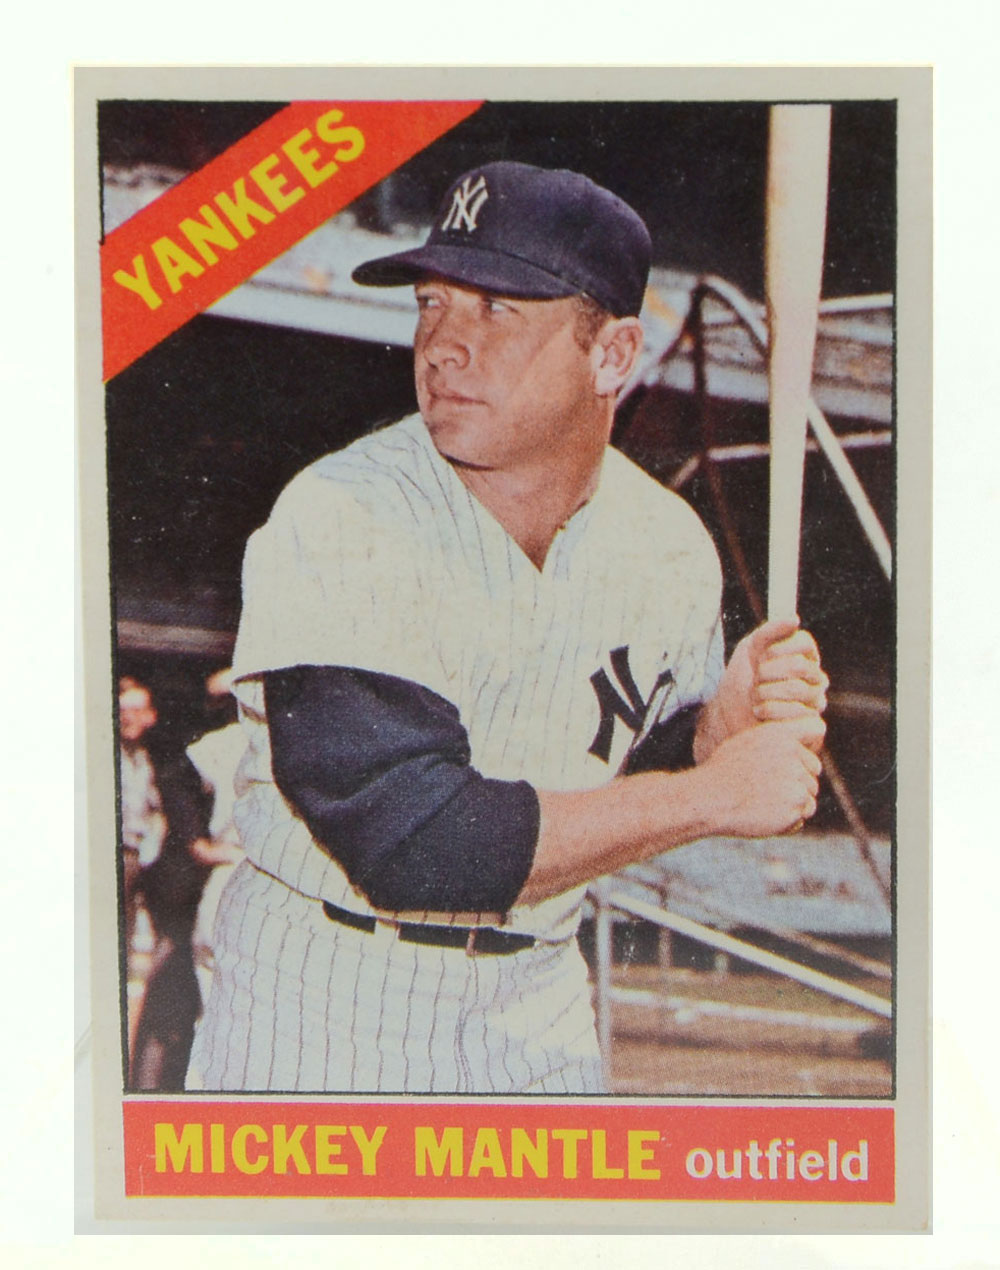 1966 TOPPS MICKEY MANTLE CARD 277294